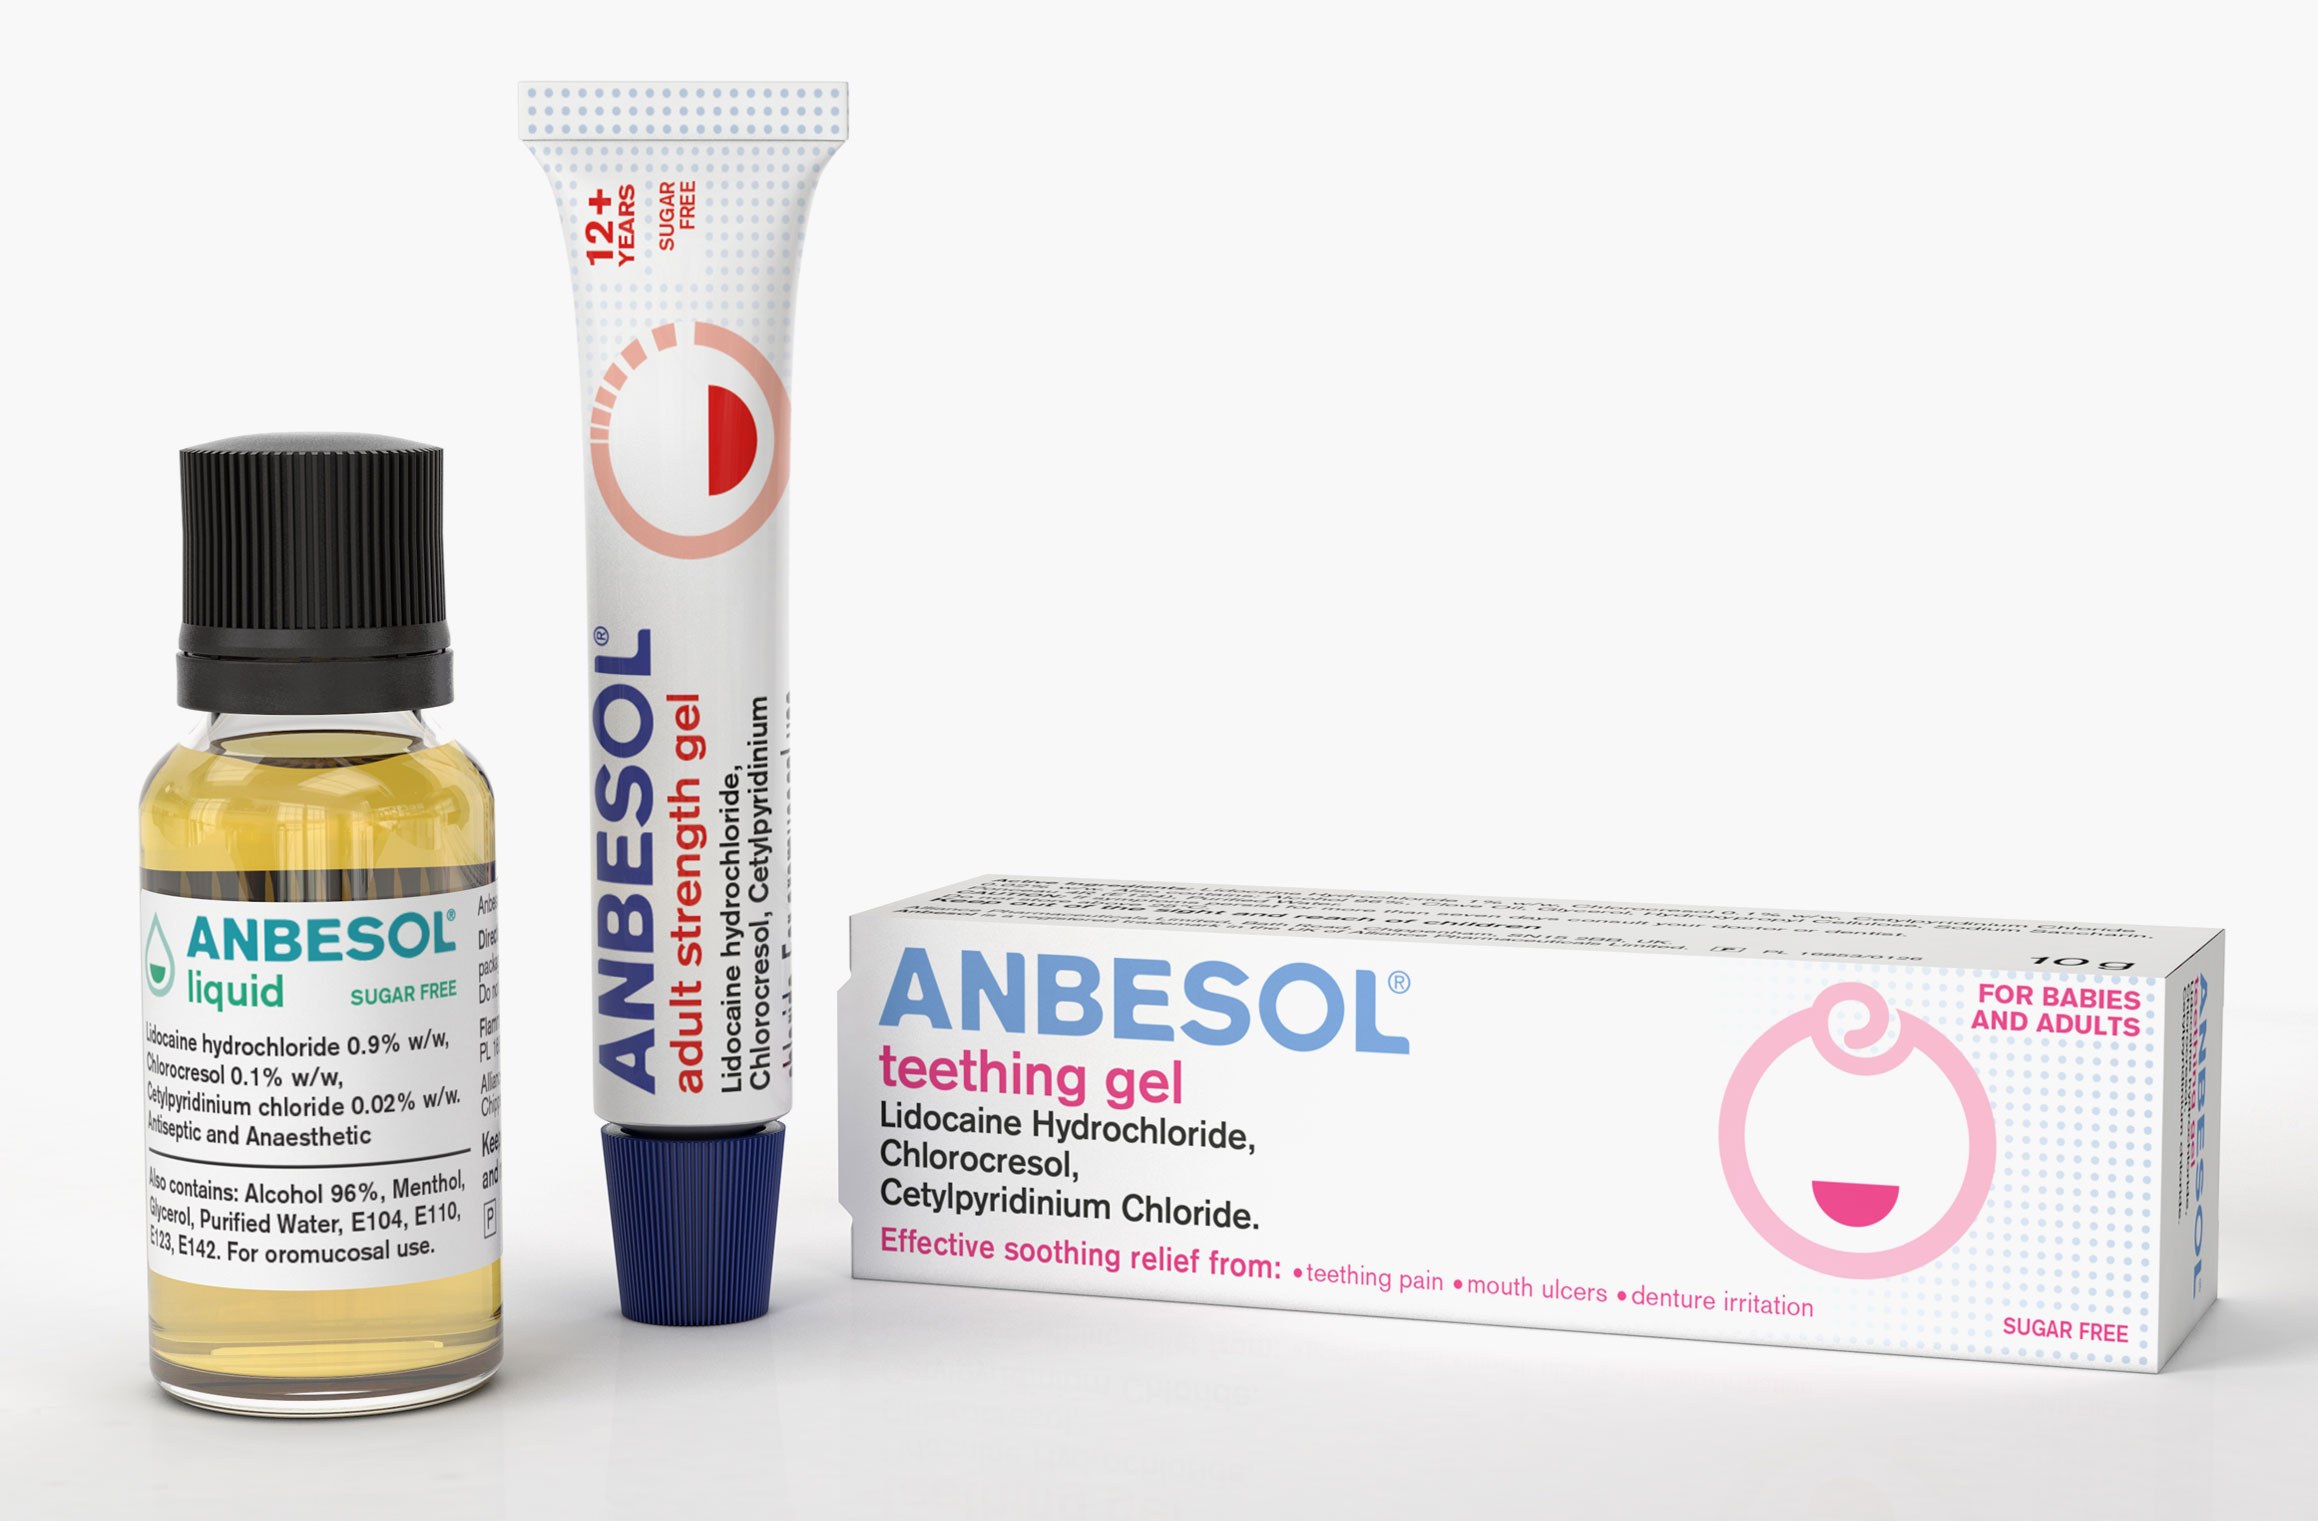 Anbesol Renders 3D Packaging Ignition